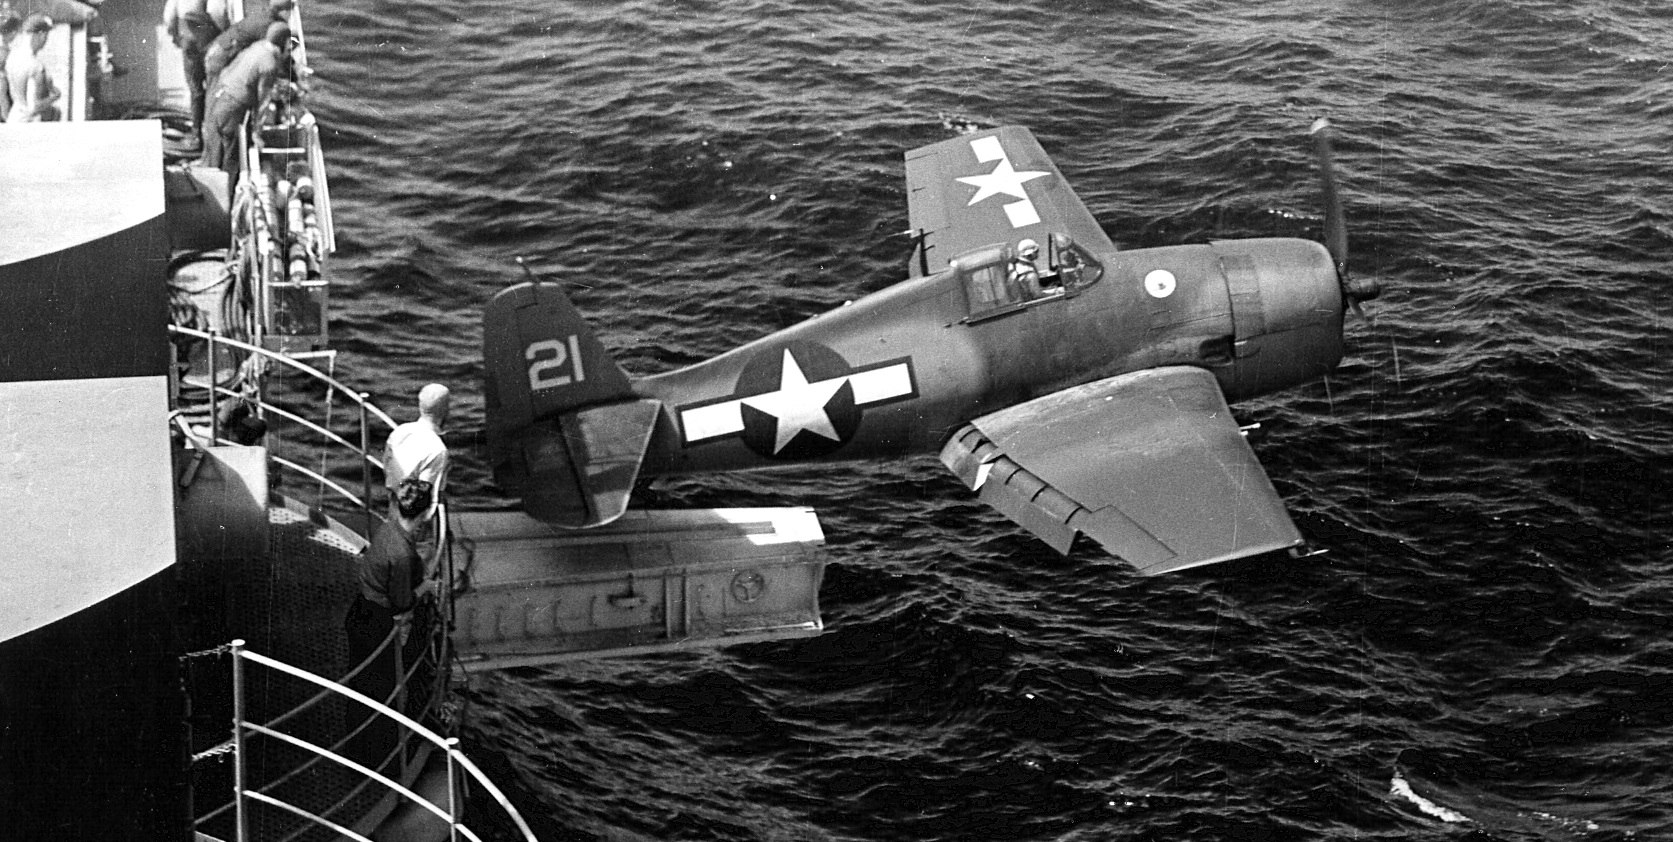 F6F Grumman Hellcat prepares for catapult launch from carrier - 271 Days of Combat